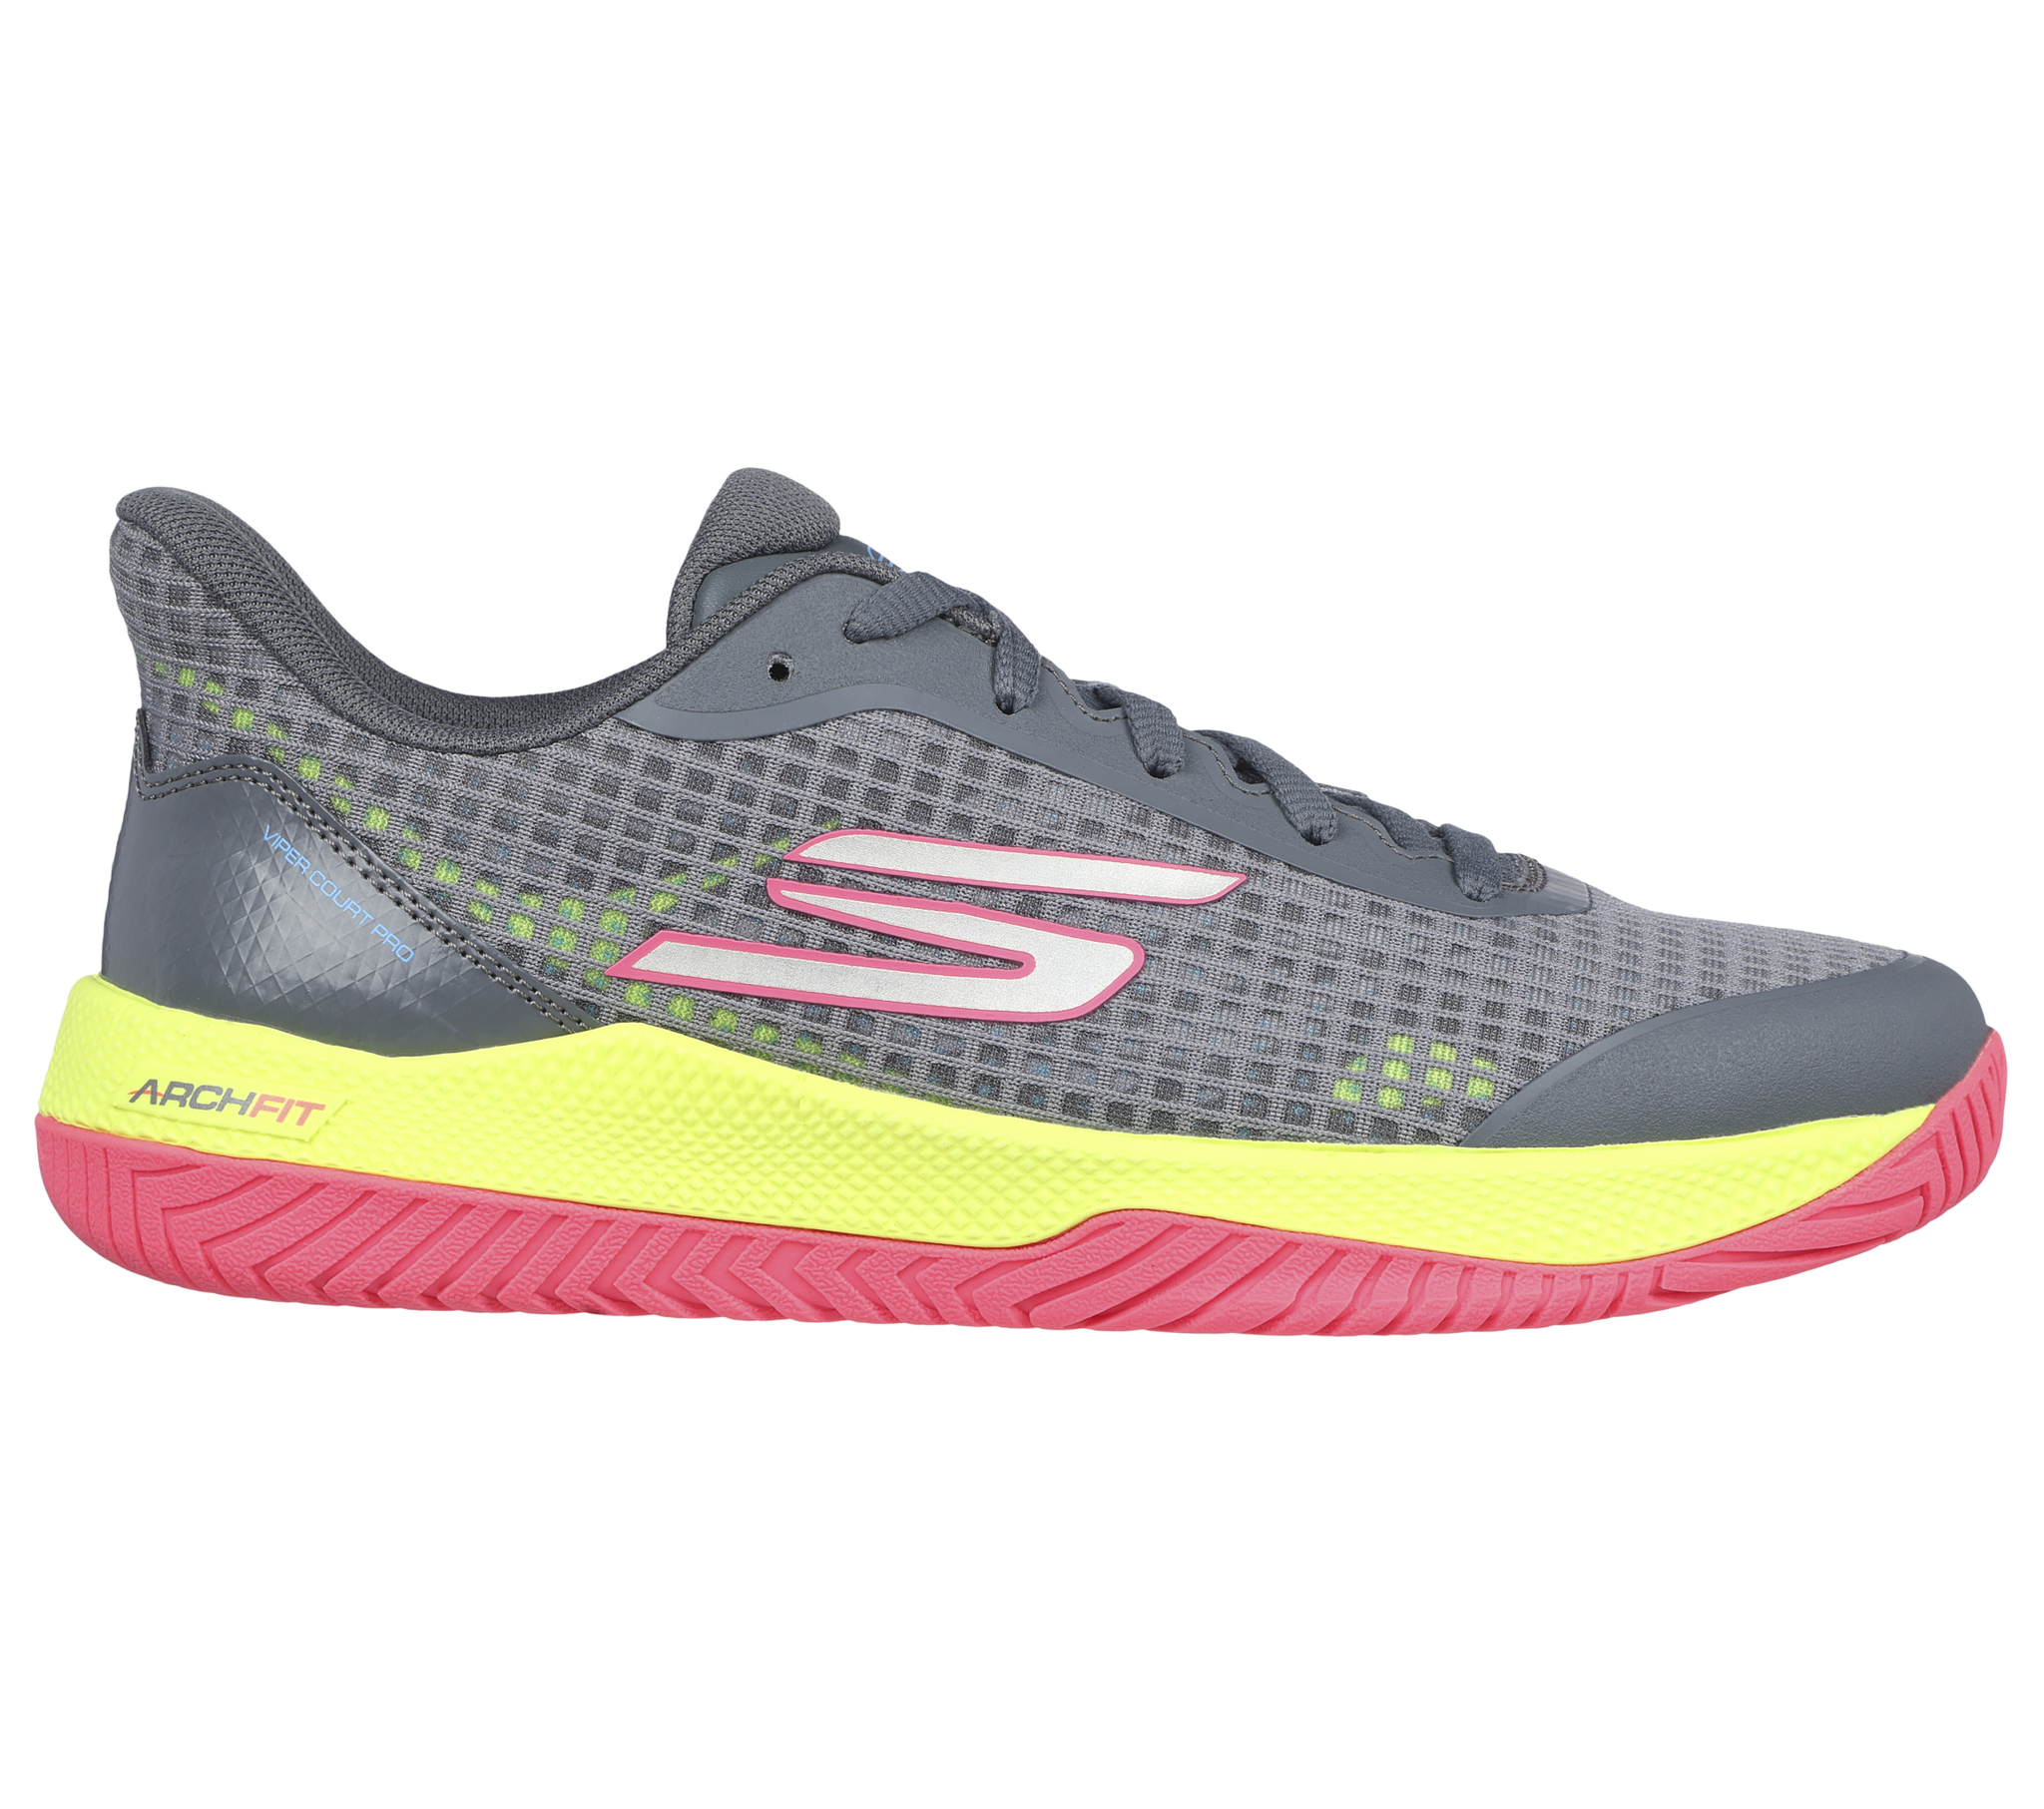 Grey, pink and yellow colored pickleball shoes by Skechers.